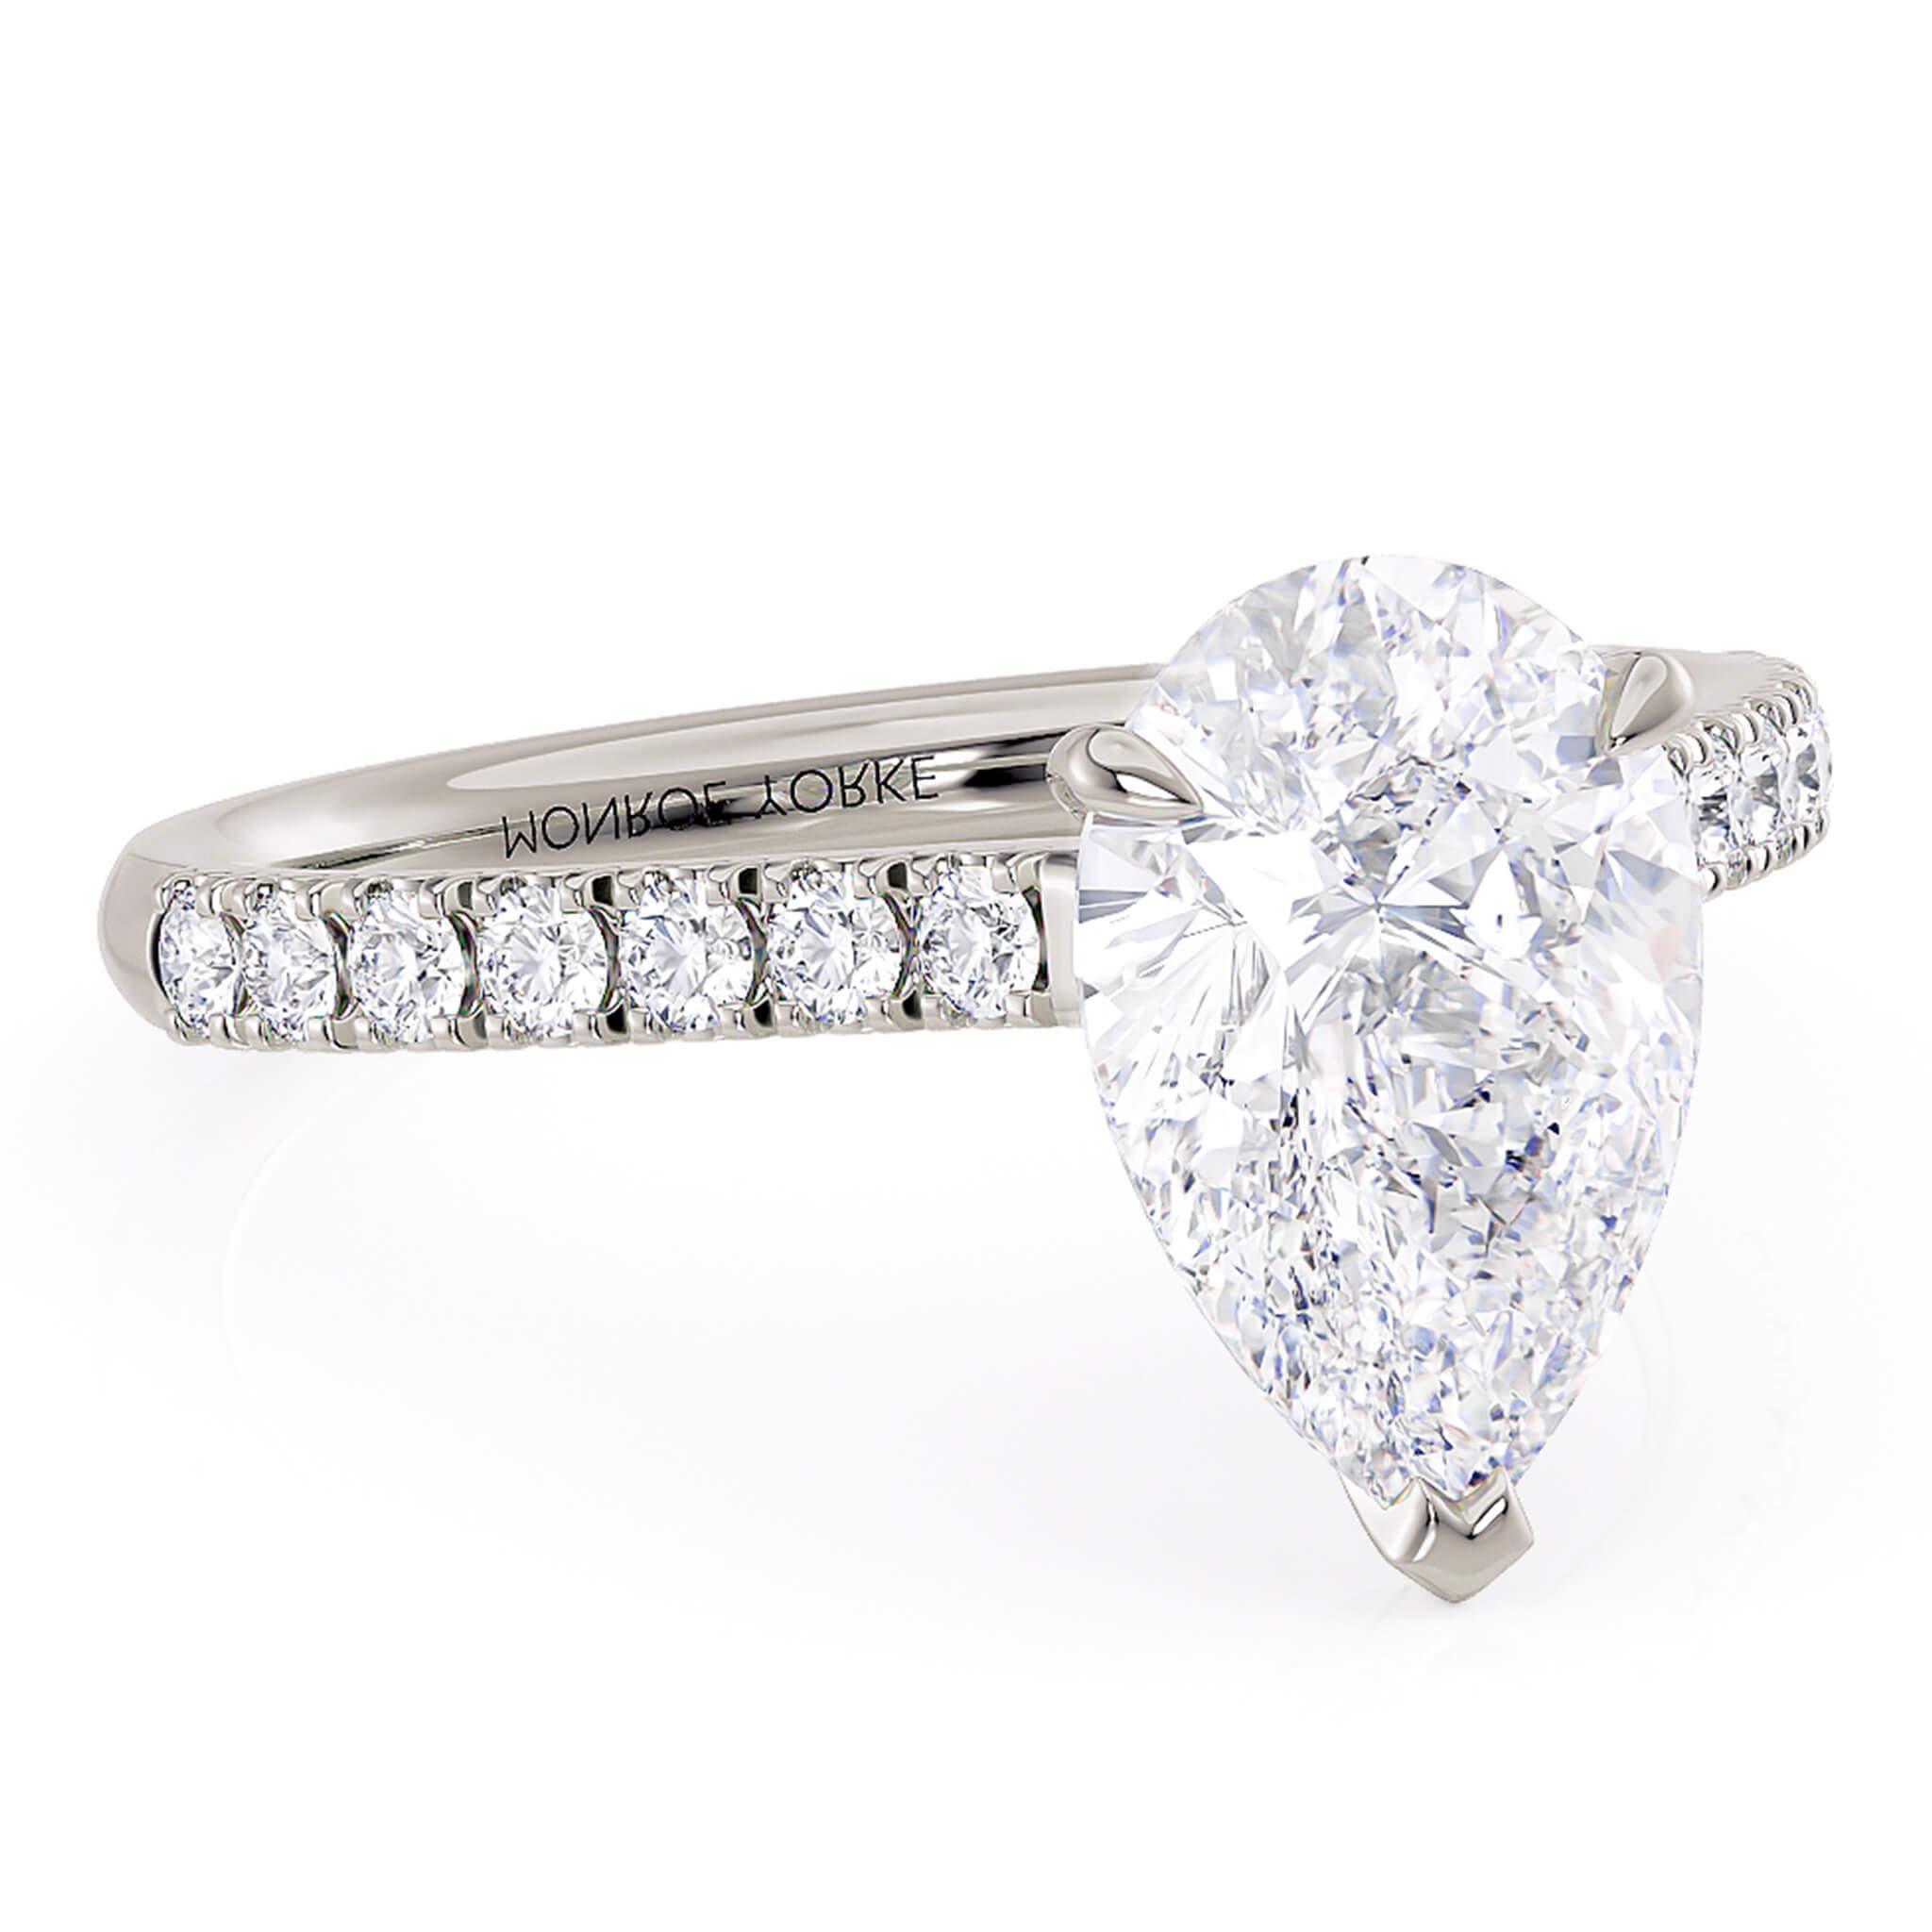 Karly pear / tear drop diamond engagement ring.  Diamonds on the band. Centre 3 claw setting.  18ct white gold or platinum